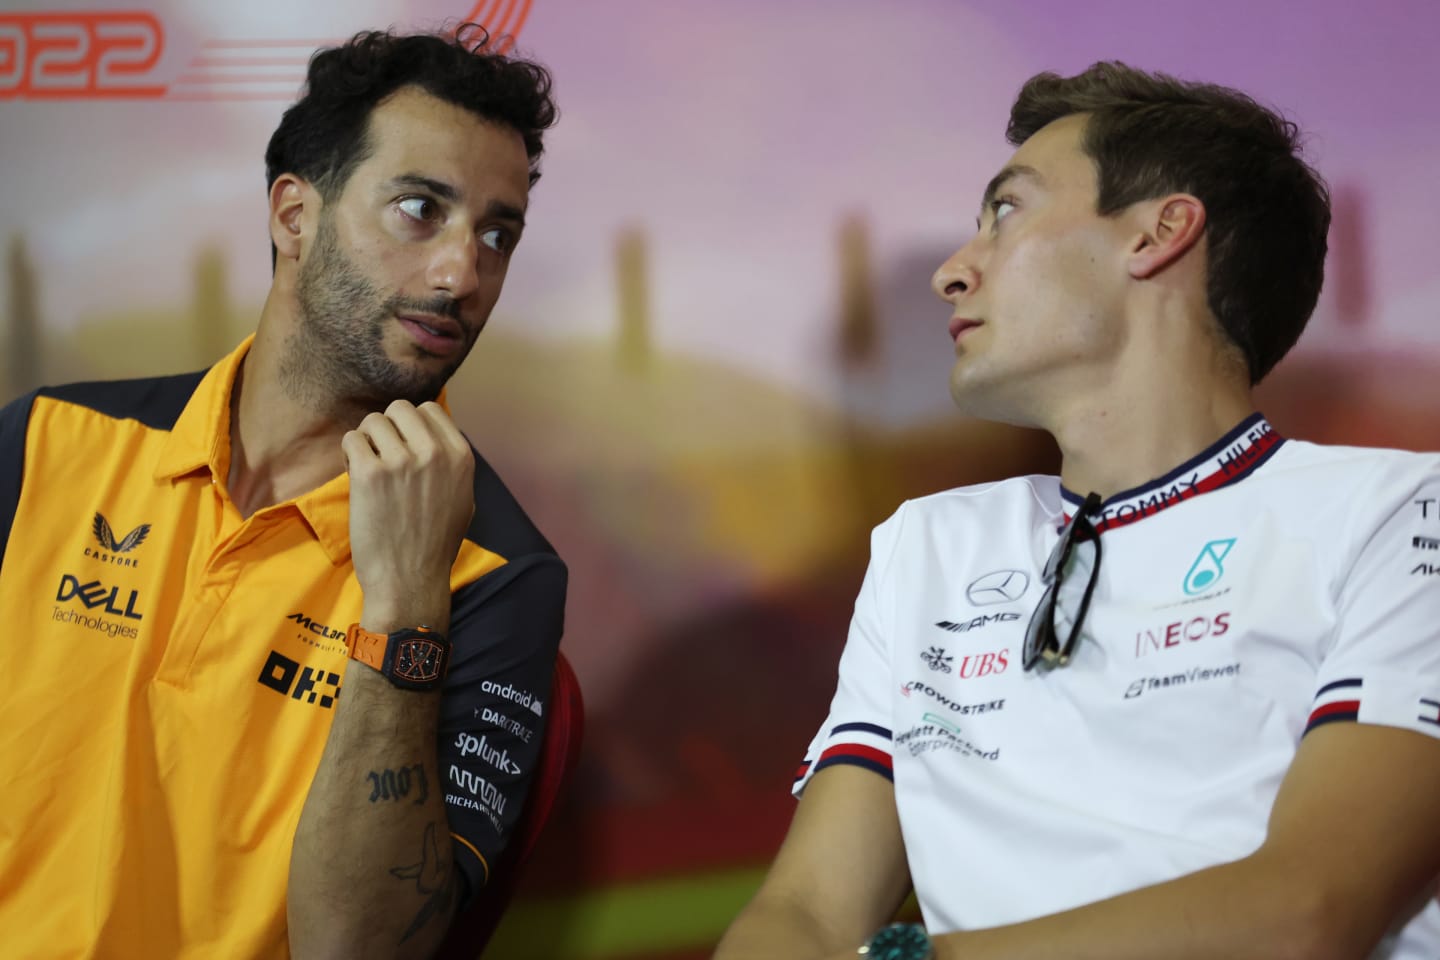 BARCELONA, SPAIN - MAY 20: Daniel Ricciardo of Australia and McLaren talks with George Russell of Great Britain and Mercedes in the Drivers Press Conference prior to practice ahead of the F1 Grand Prix of Spain at Circuit de Barcelona-Catalunya on May 20, 2022 in Barcelona, Spain. (Photo by Bryn Lennon/Getty Images)